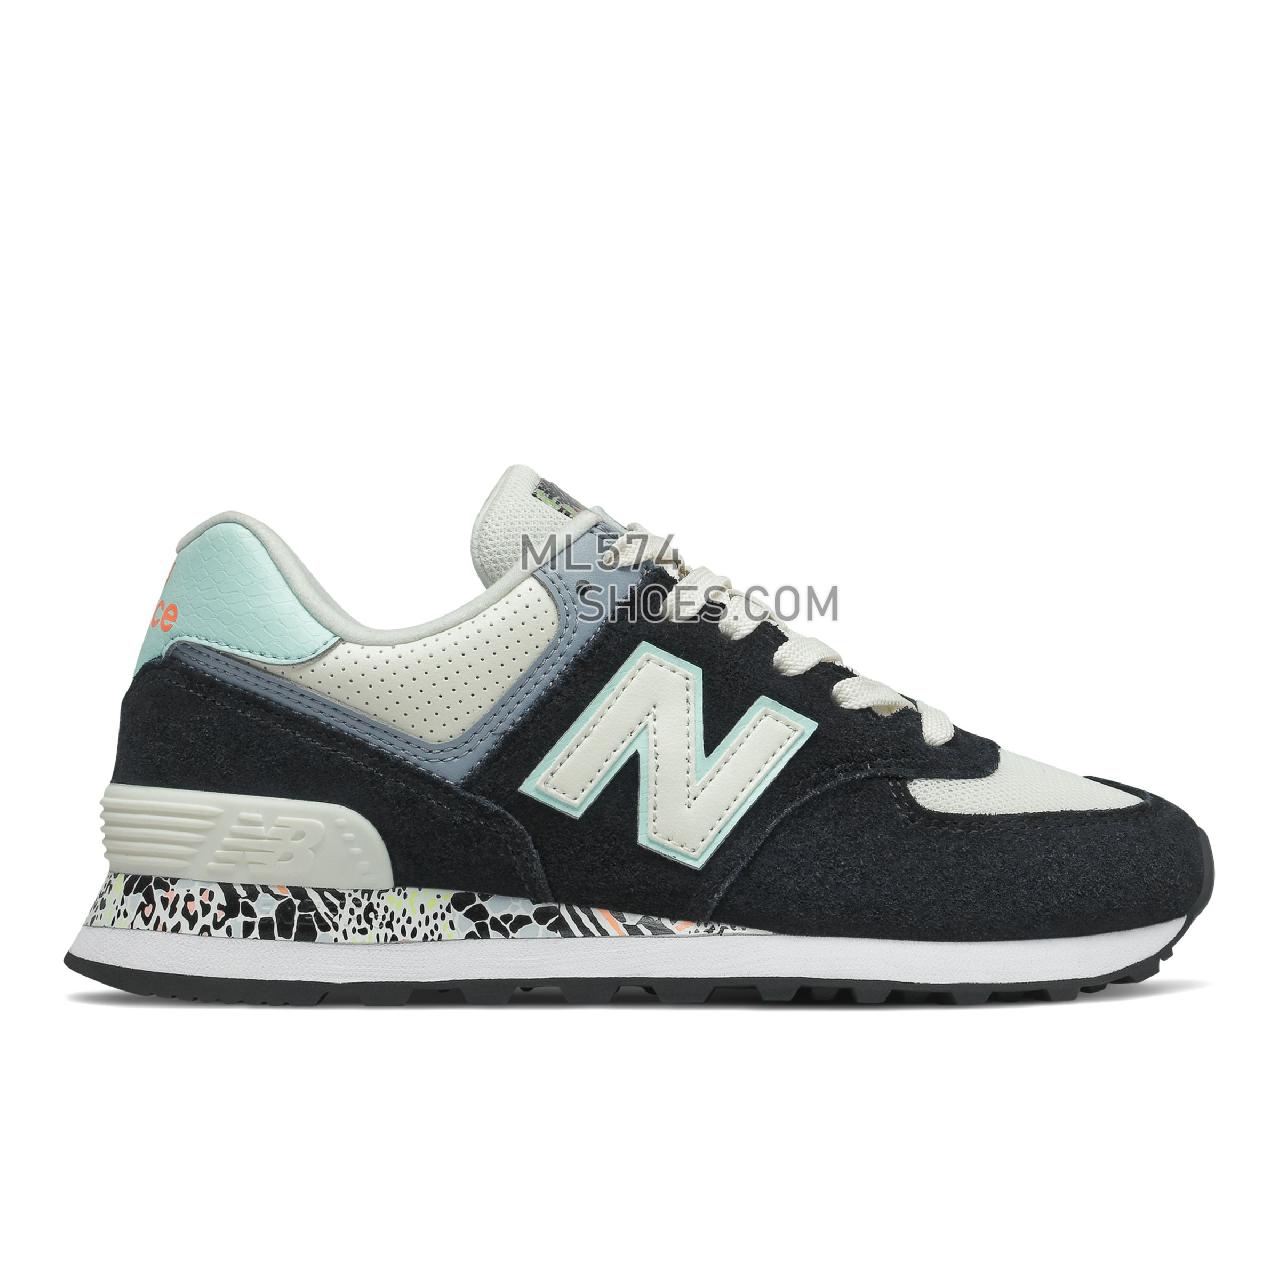 New Balance 574 - Women's Classic Sneakers - Black with White Mint - WL574CA2